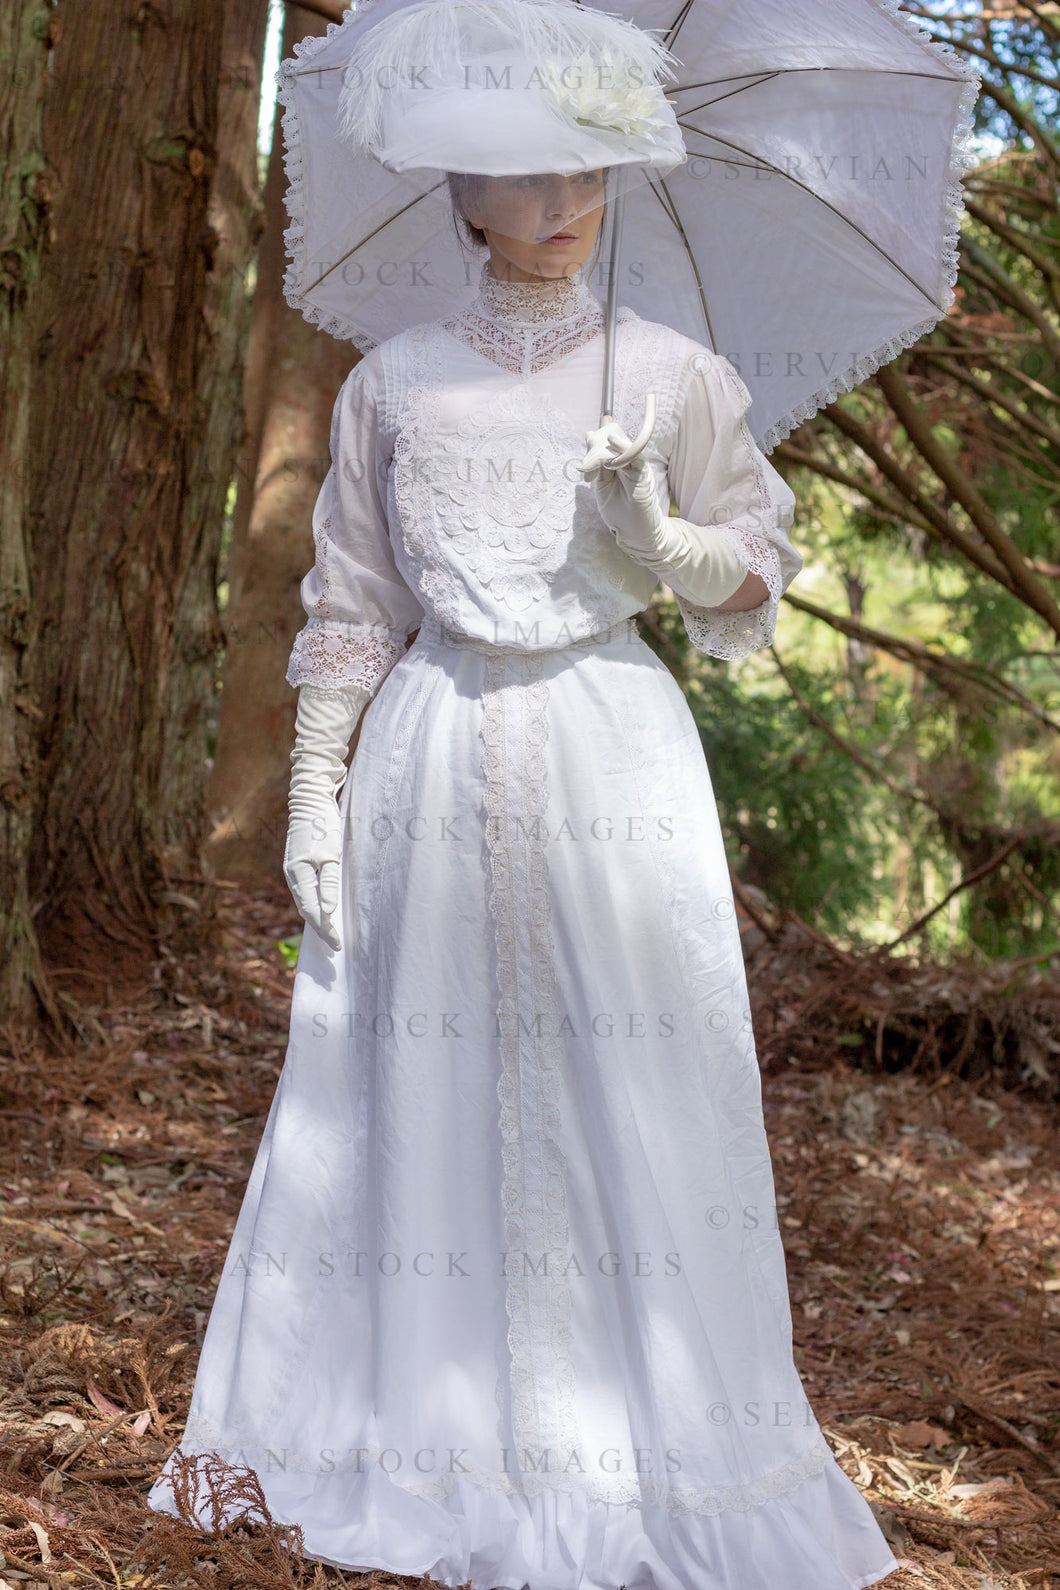 Edwardian woman in a white lace blouse and skirt and walking in a garden (Tayla 0261)